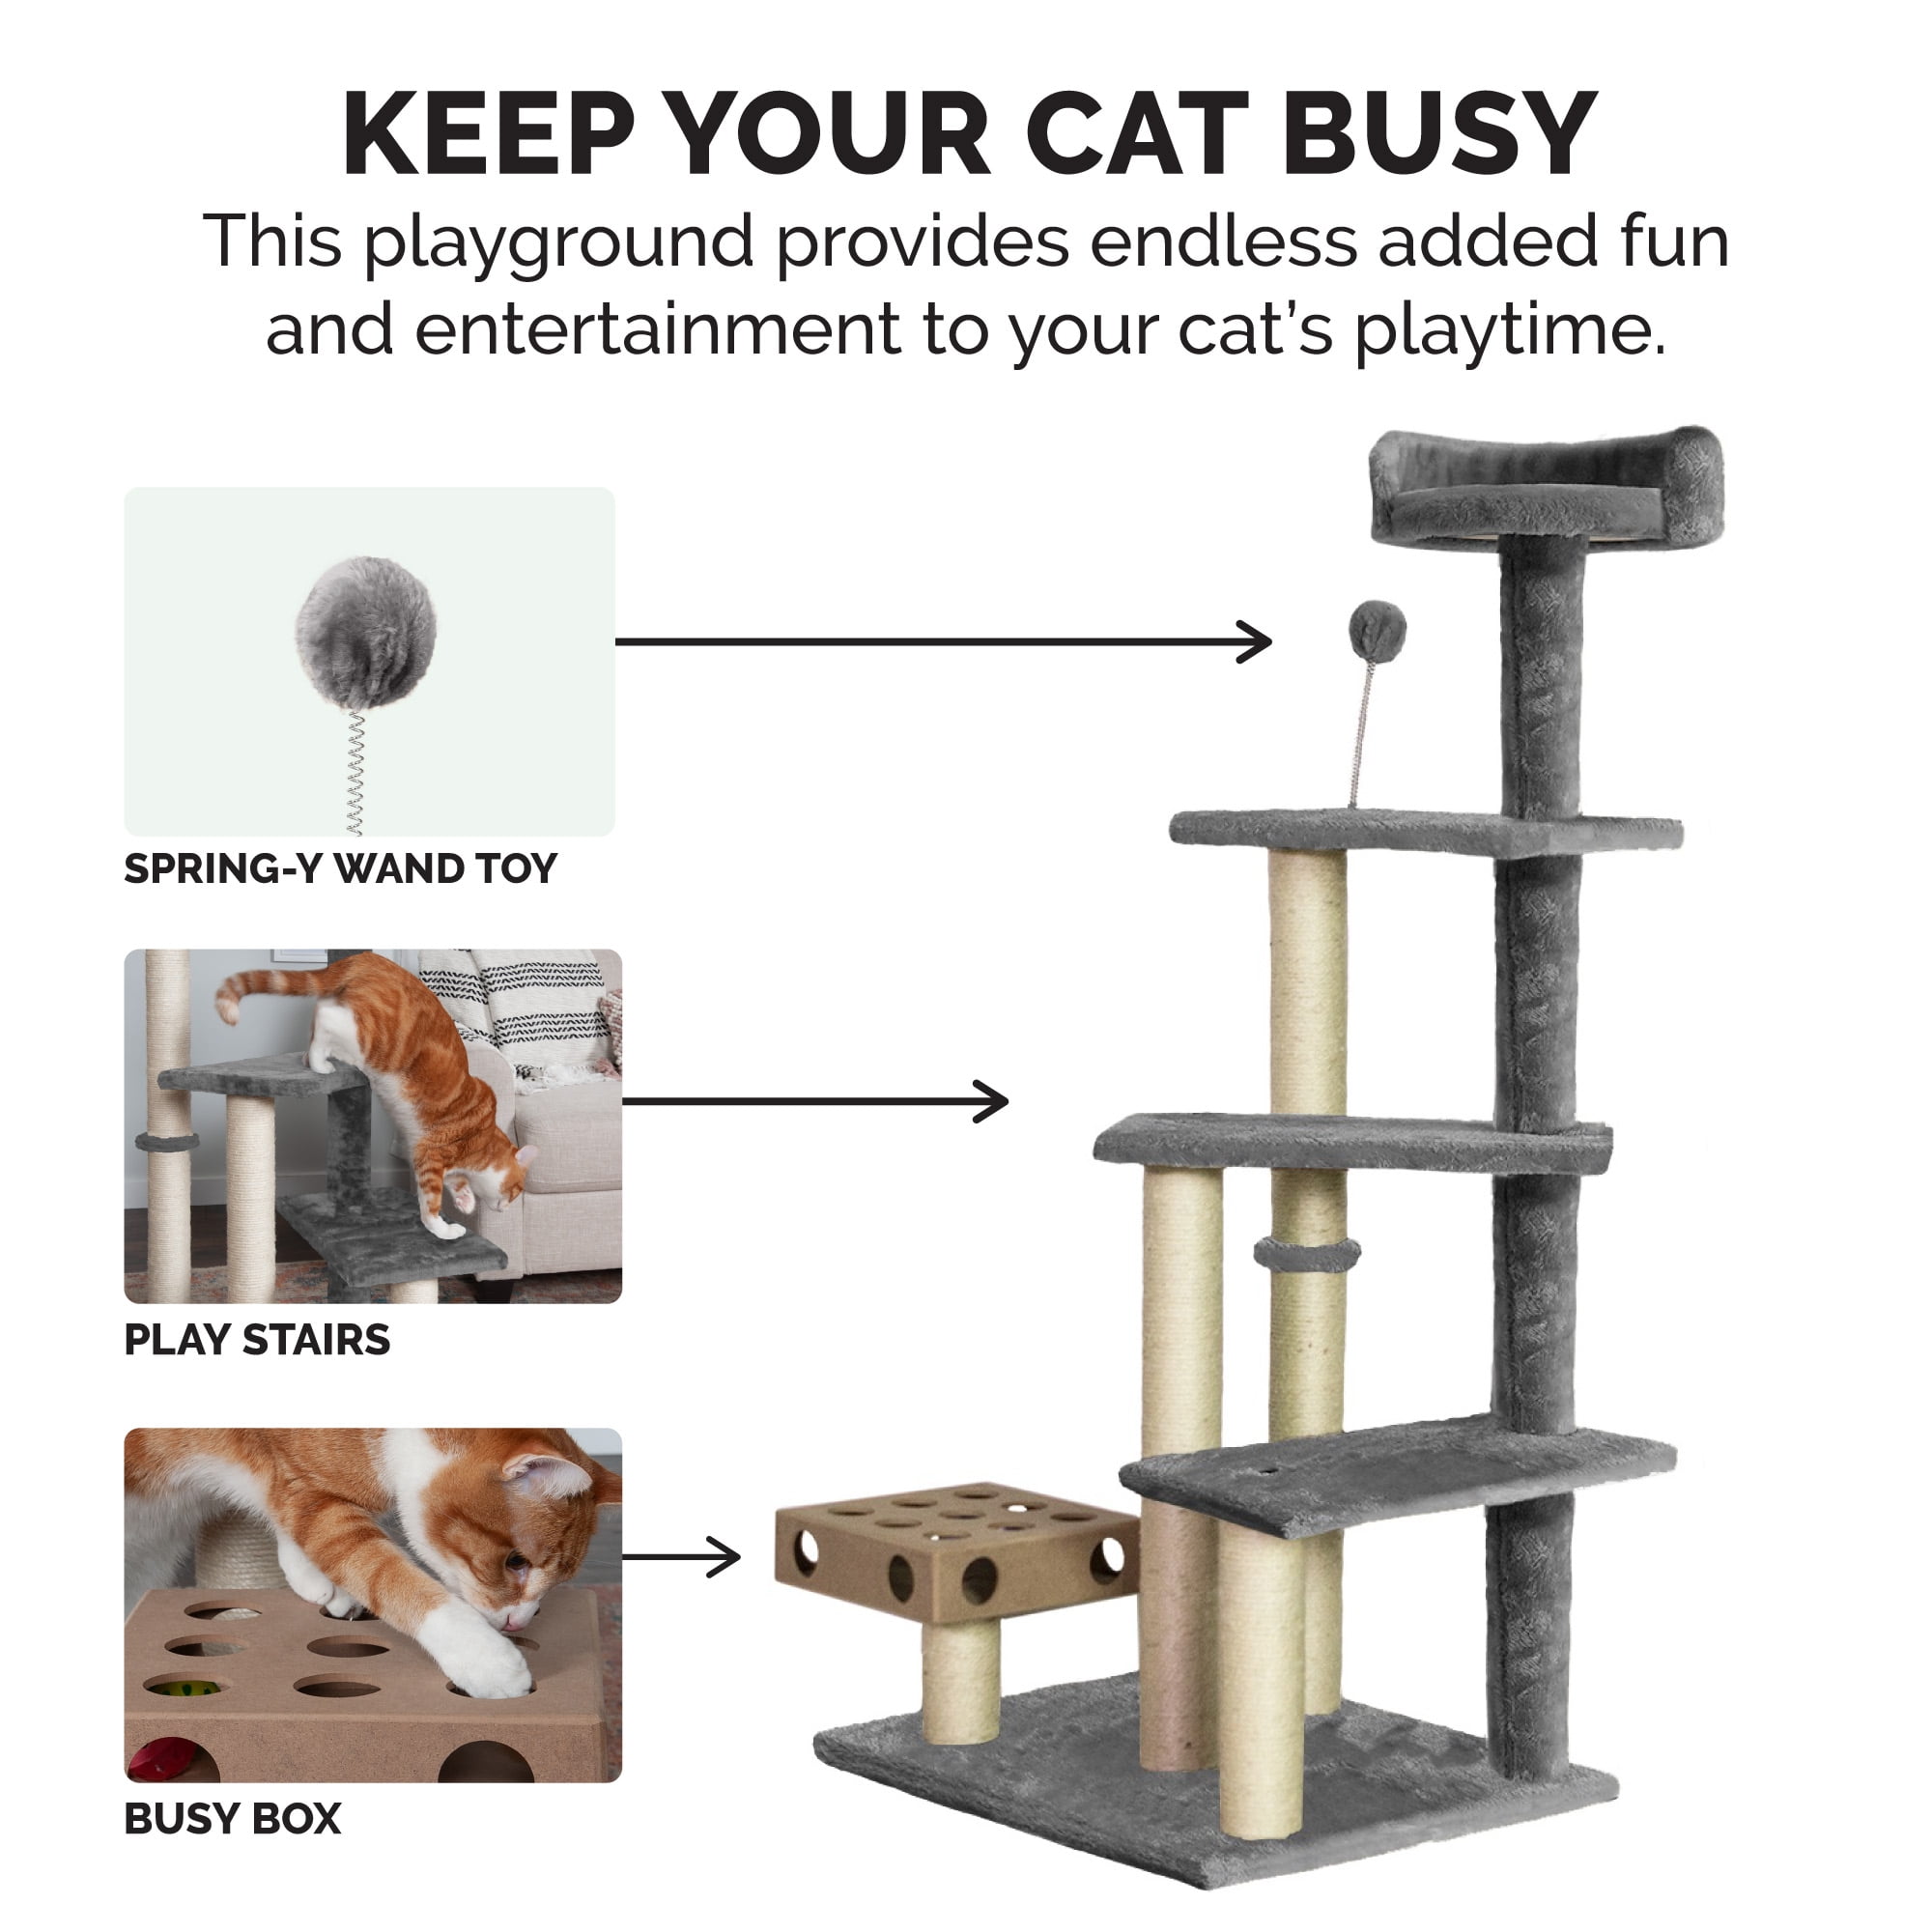 FurHaven Pet Products Cat Furniture Play Stairs with Cat-IQ Busy